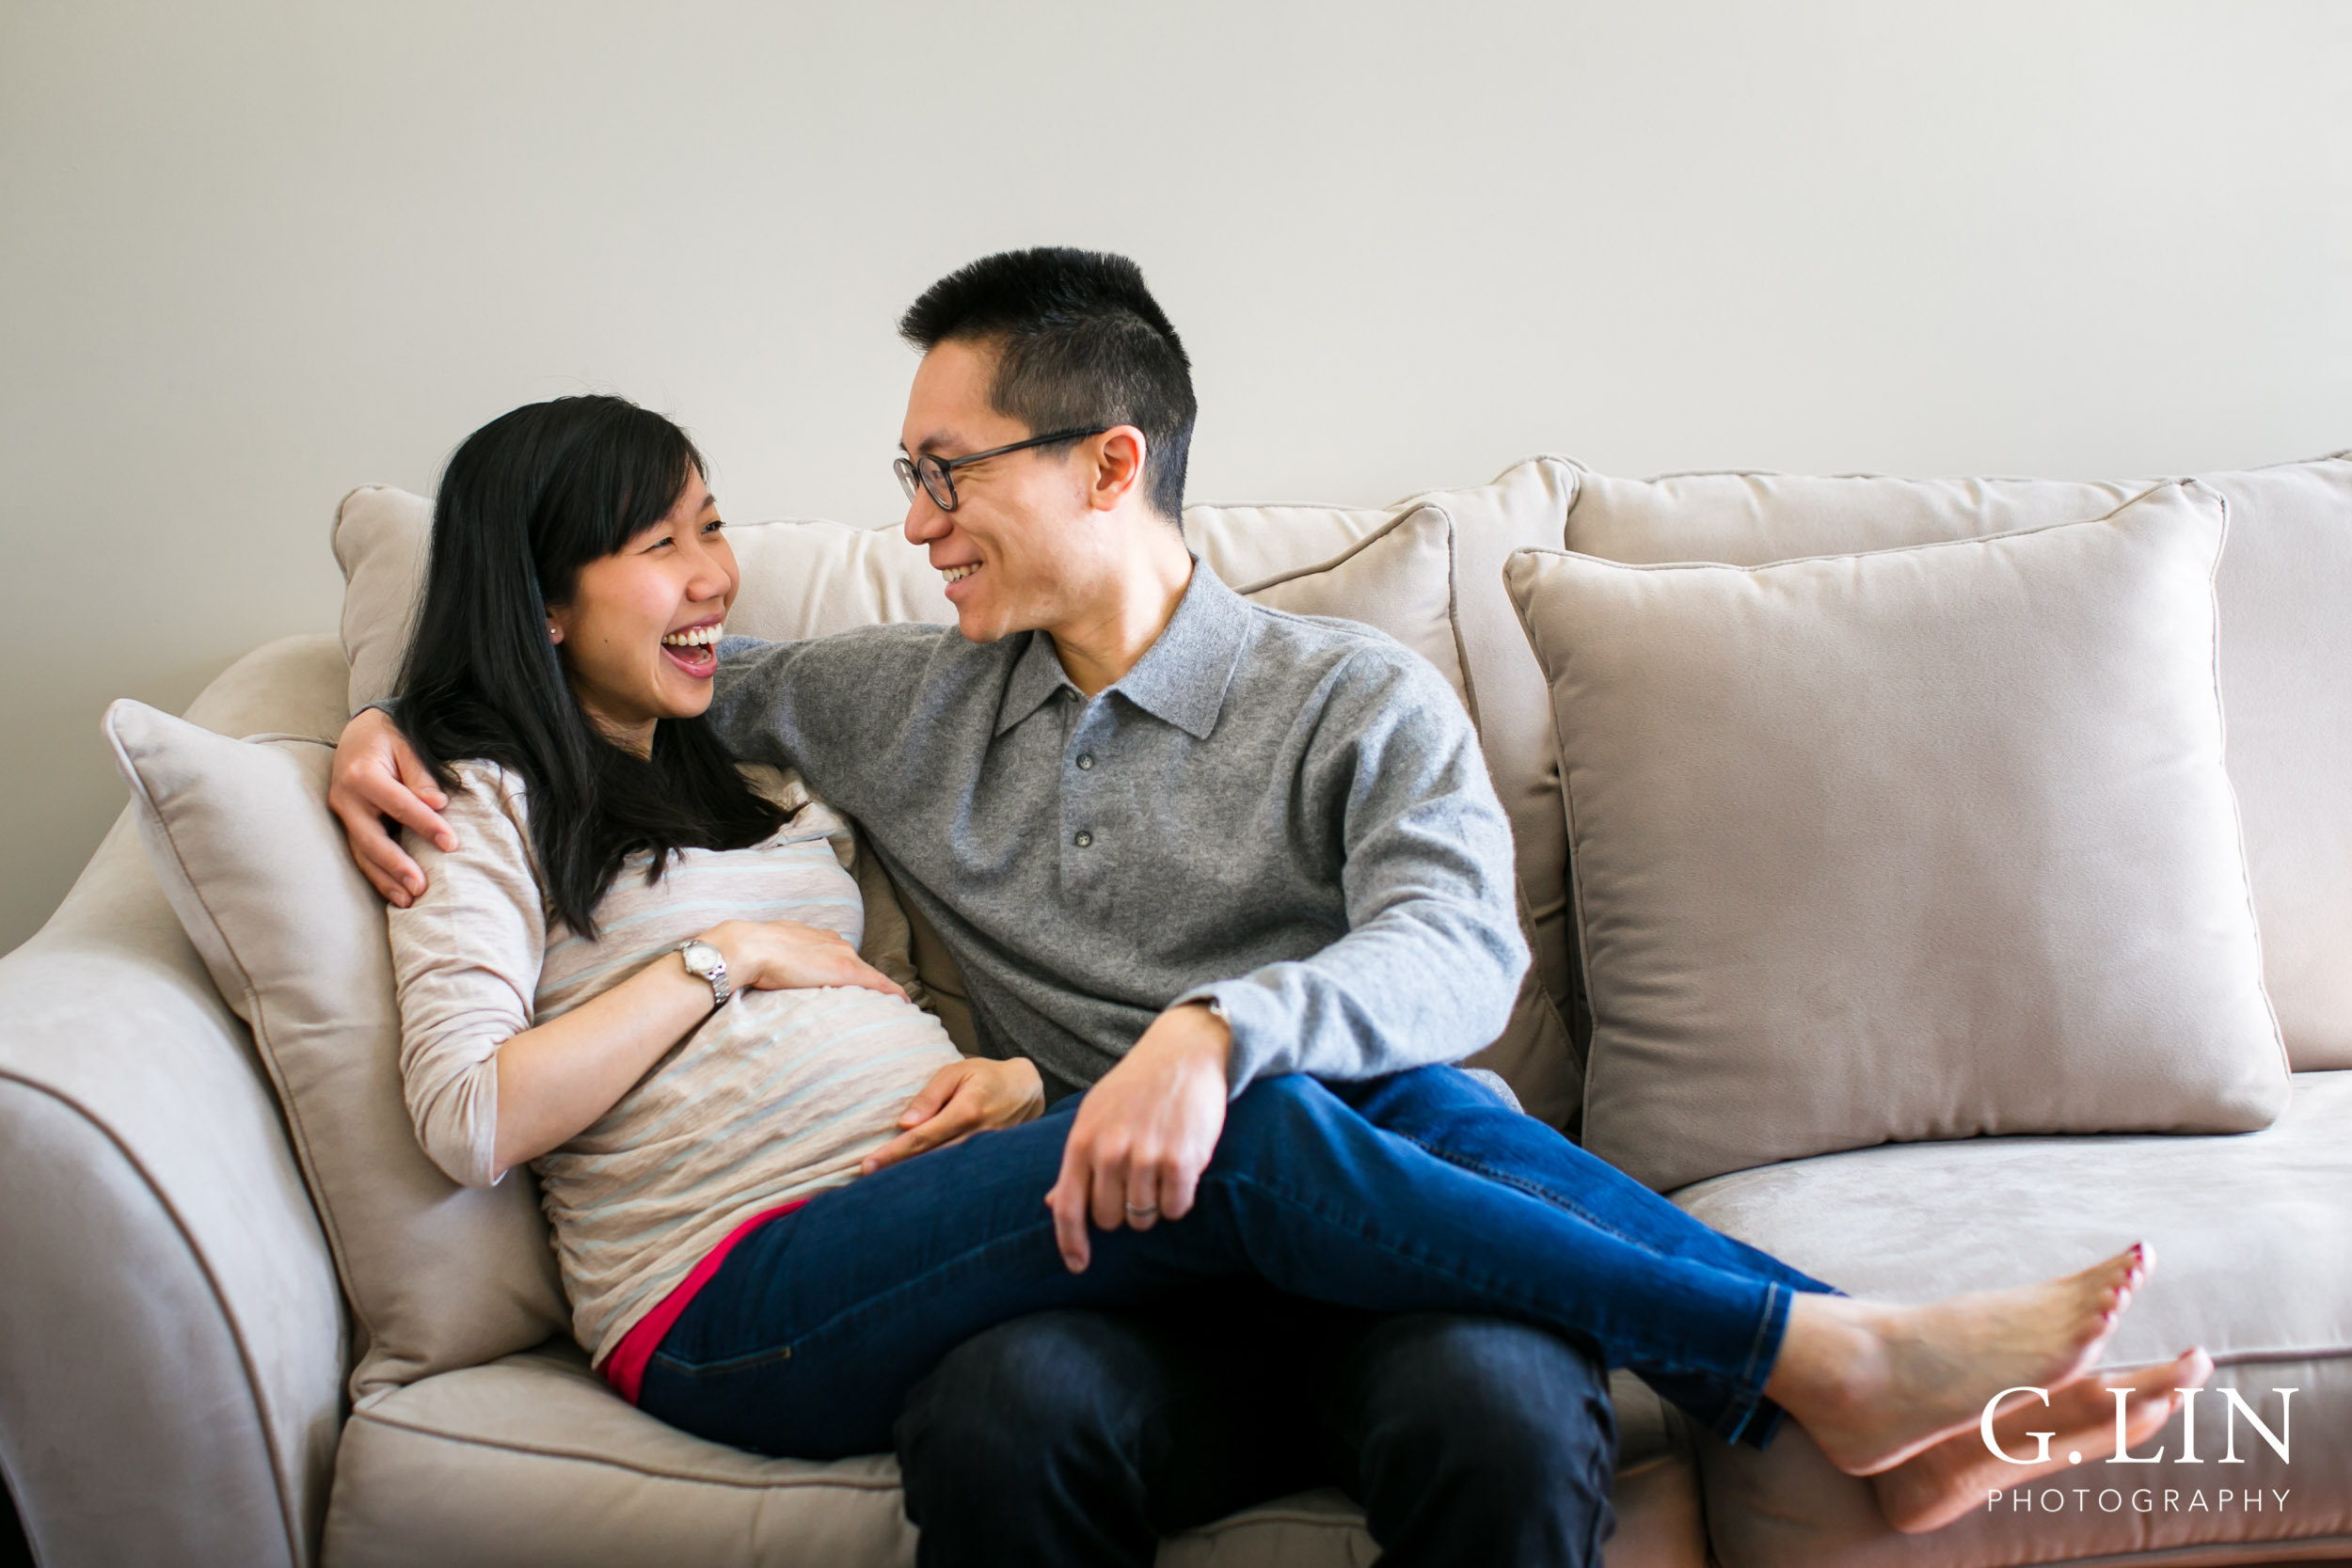 Durham Maternity Photography | G. Lin Photography | Couple sitting on couch and laughing